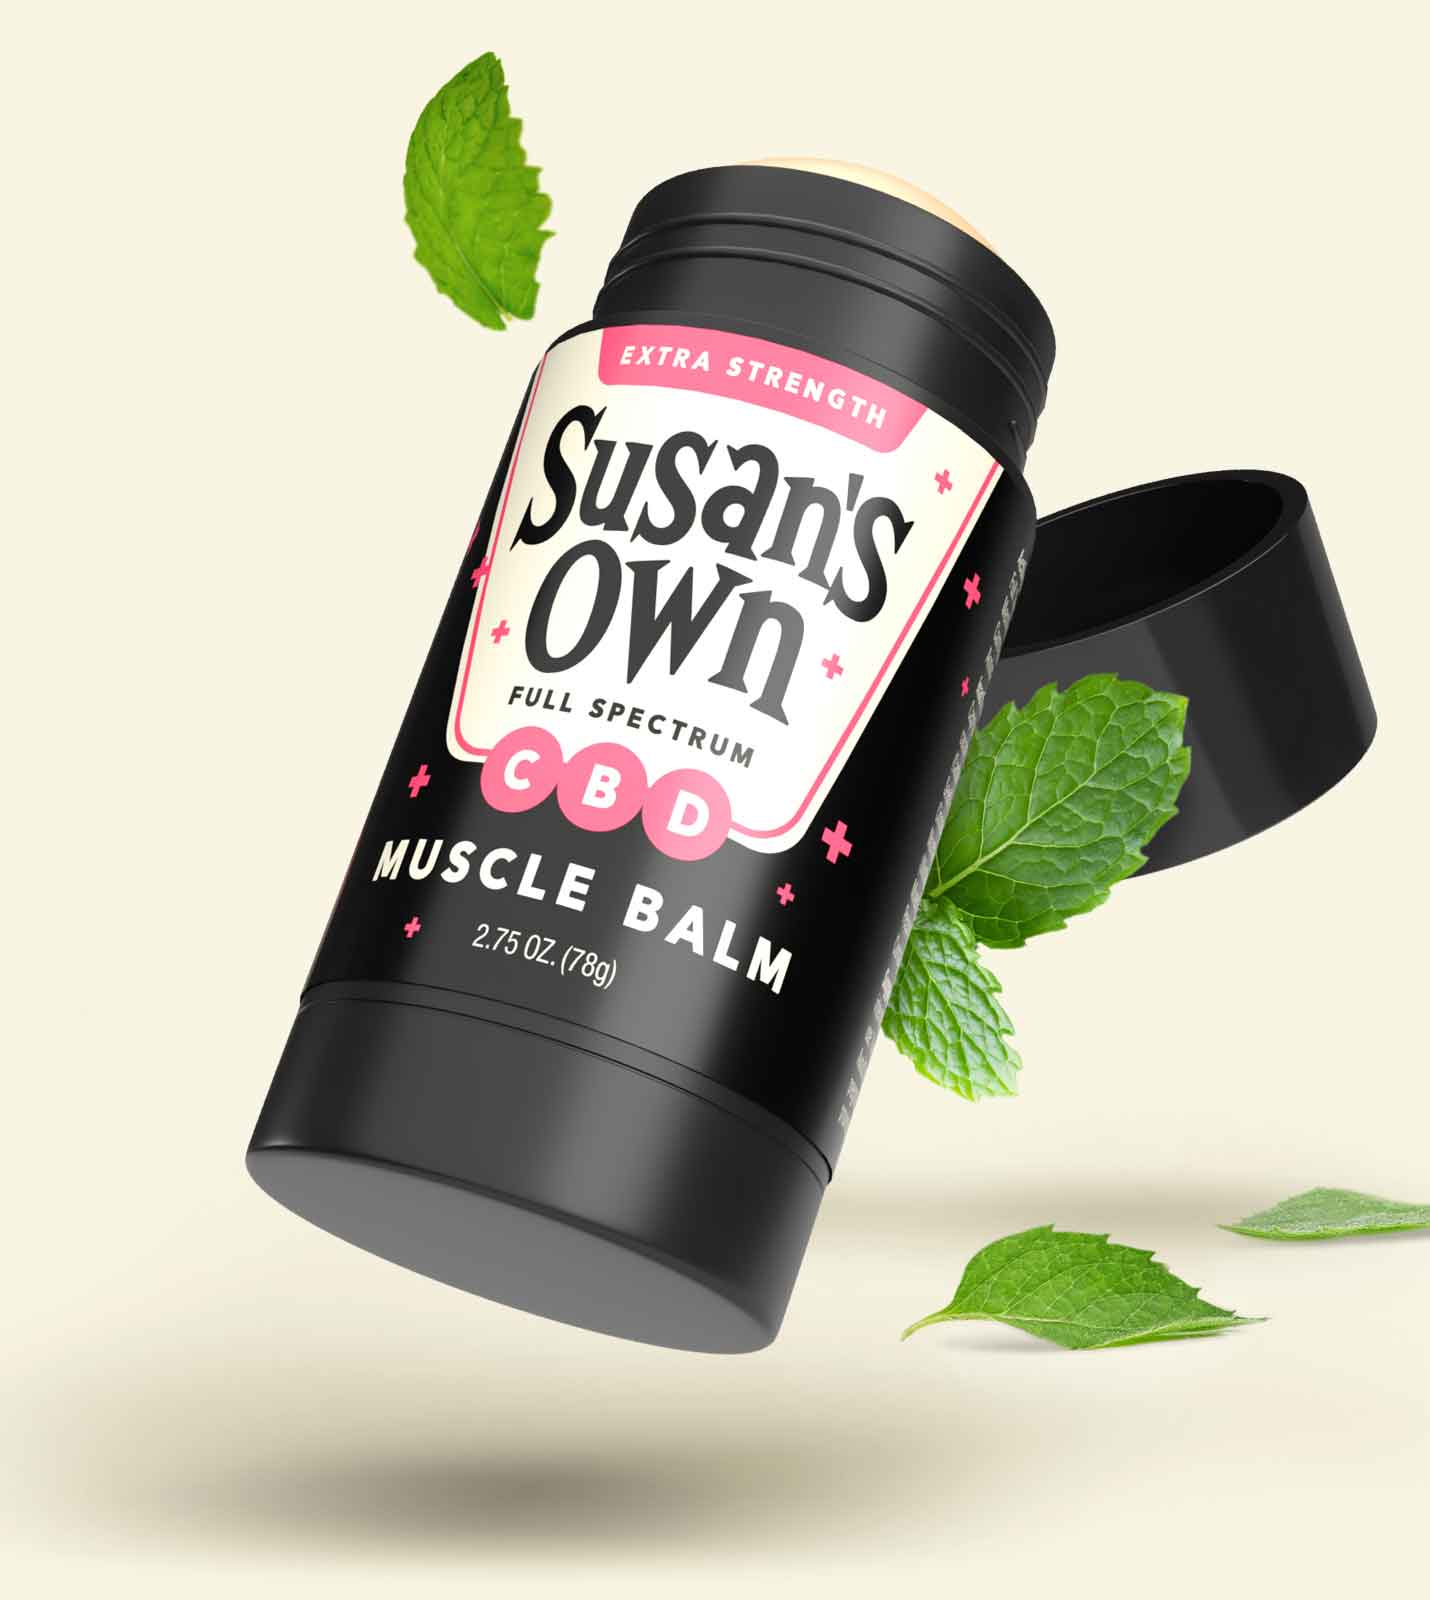 Susan's Own CBD Muscle Balm Packaging - Design by SixAbove Studios